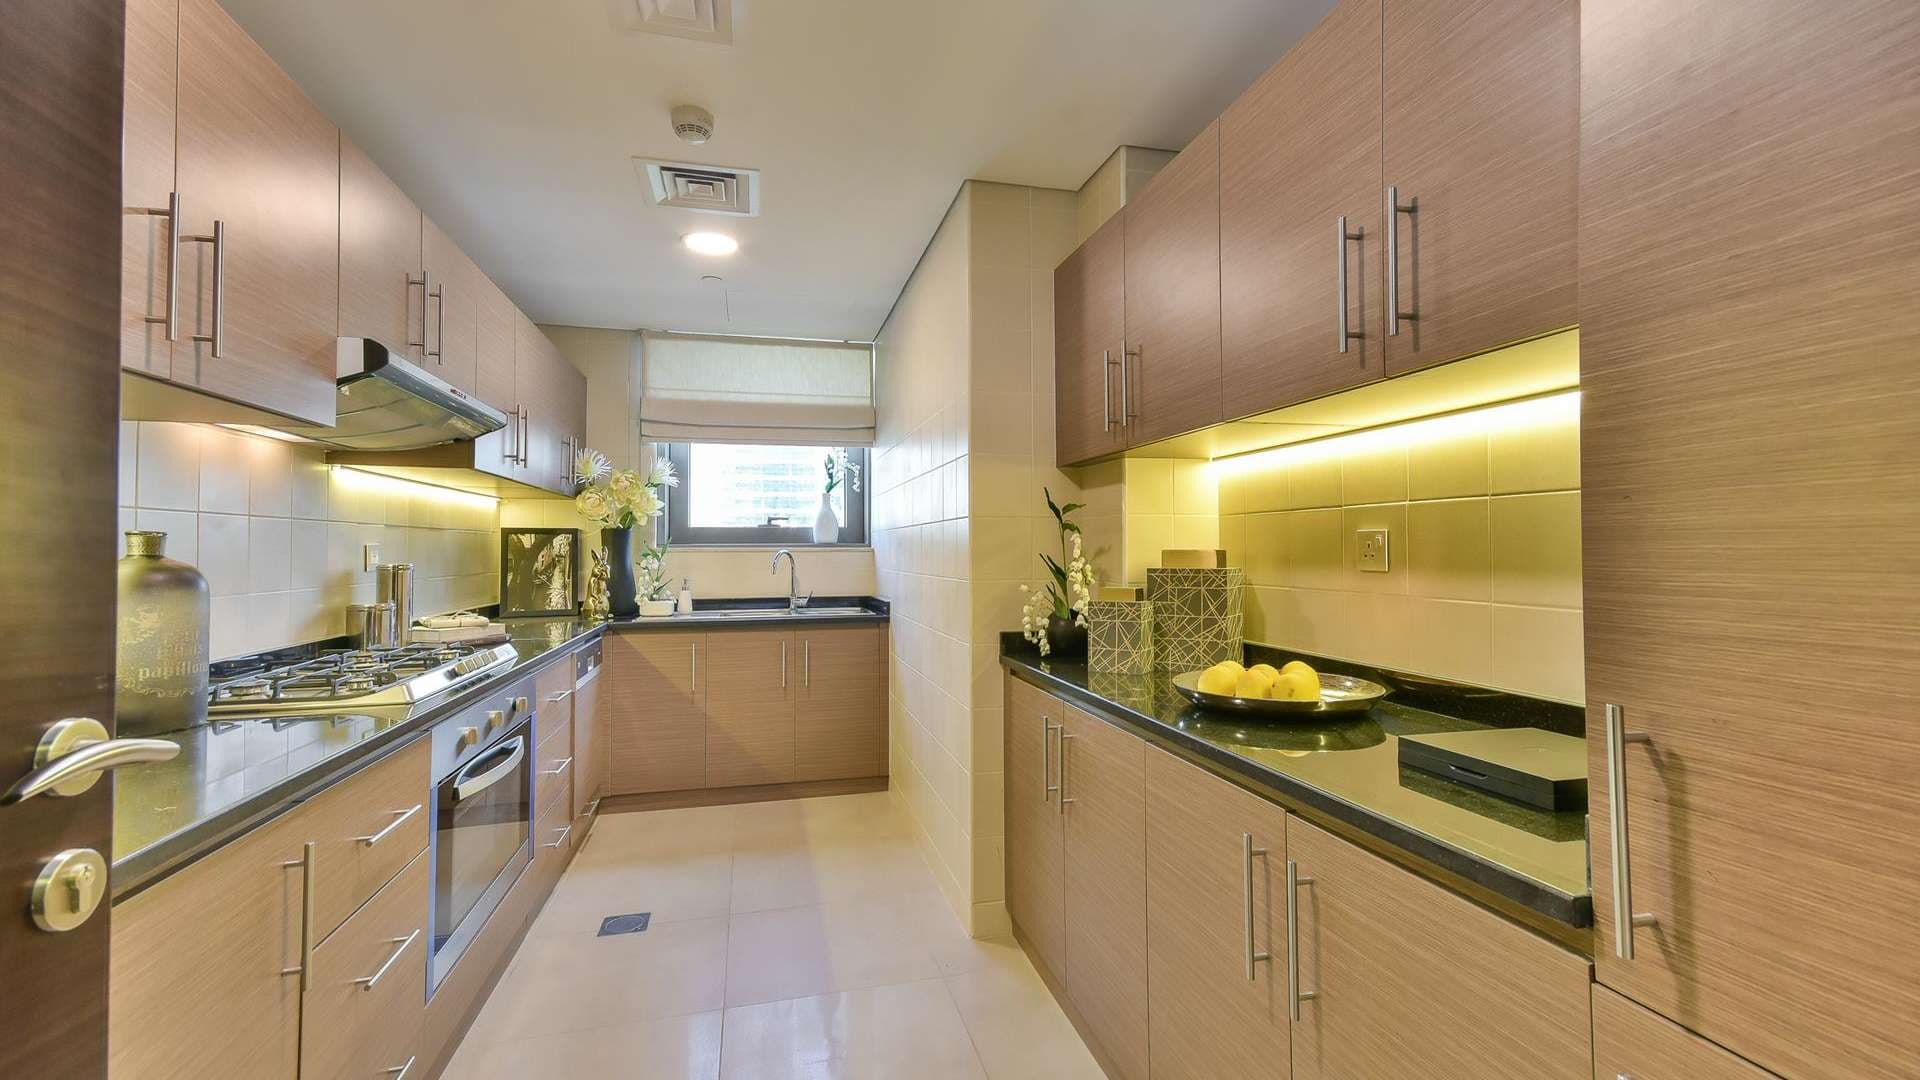 Apartment For Sale Sparkle Towers Lp02664 1454fbb8779a5000.jpg